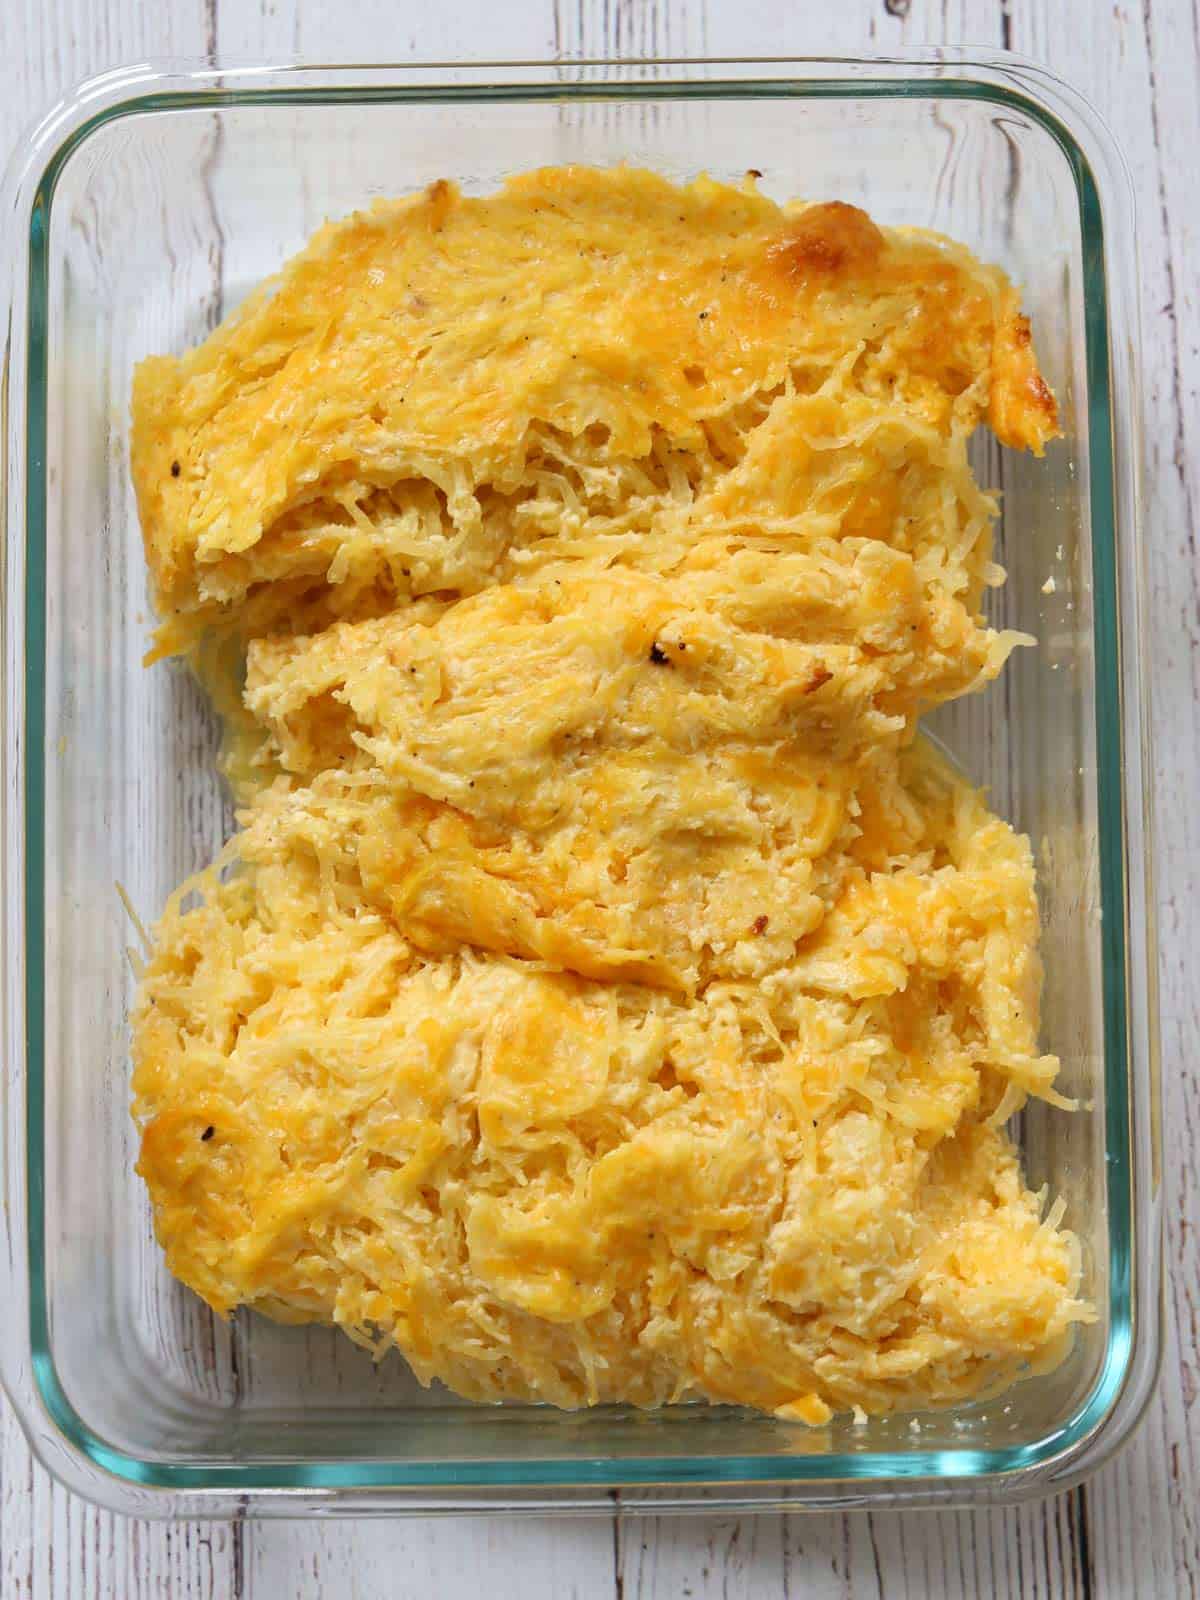 Leftover spaghetti squash casserole is kept in a glass food storage container.